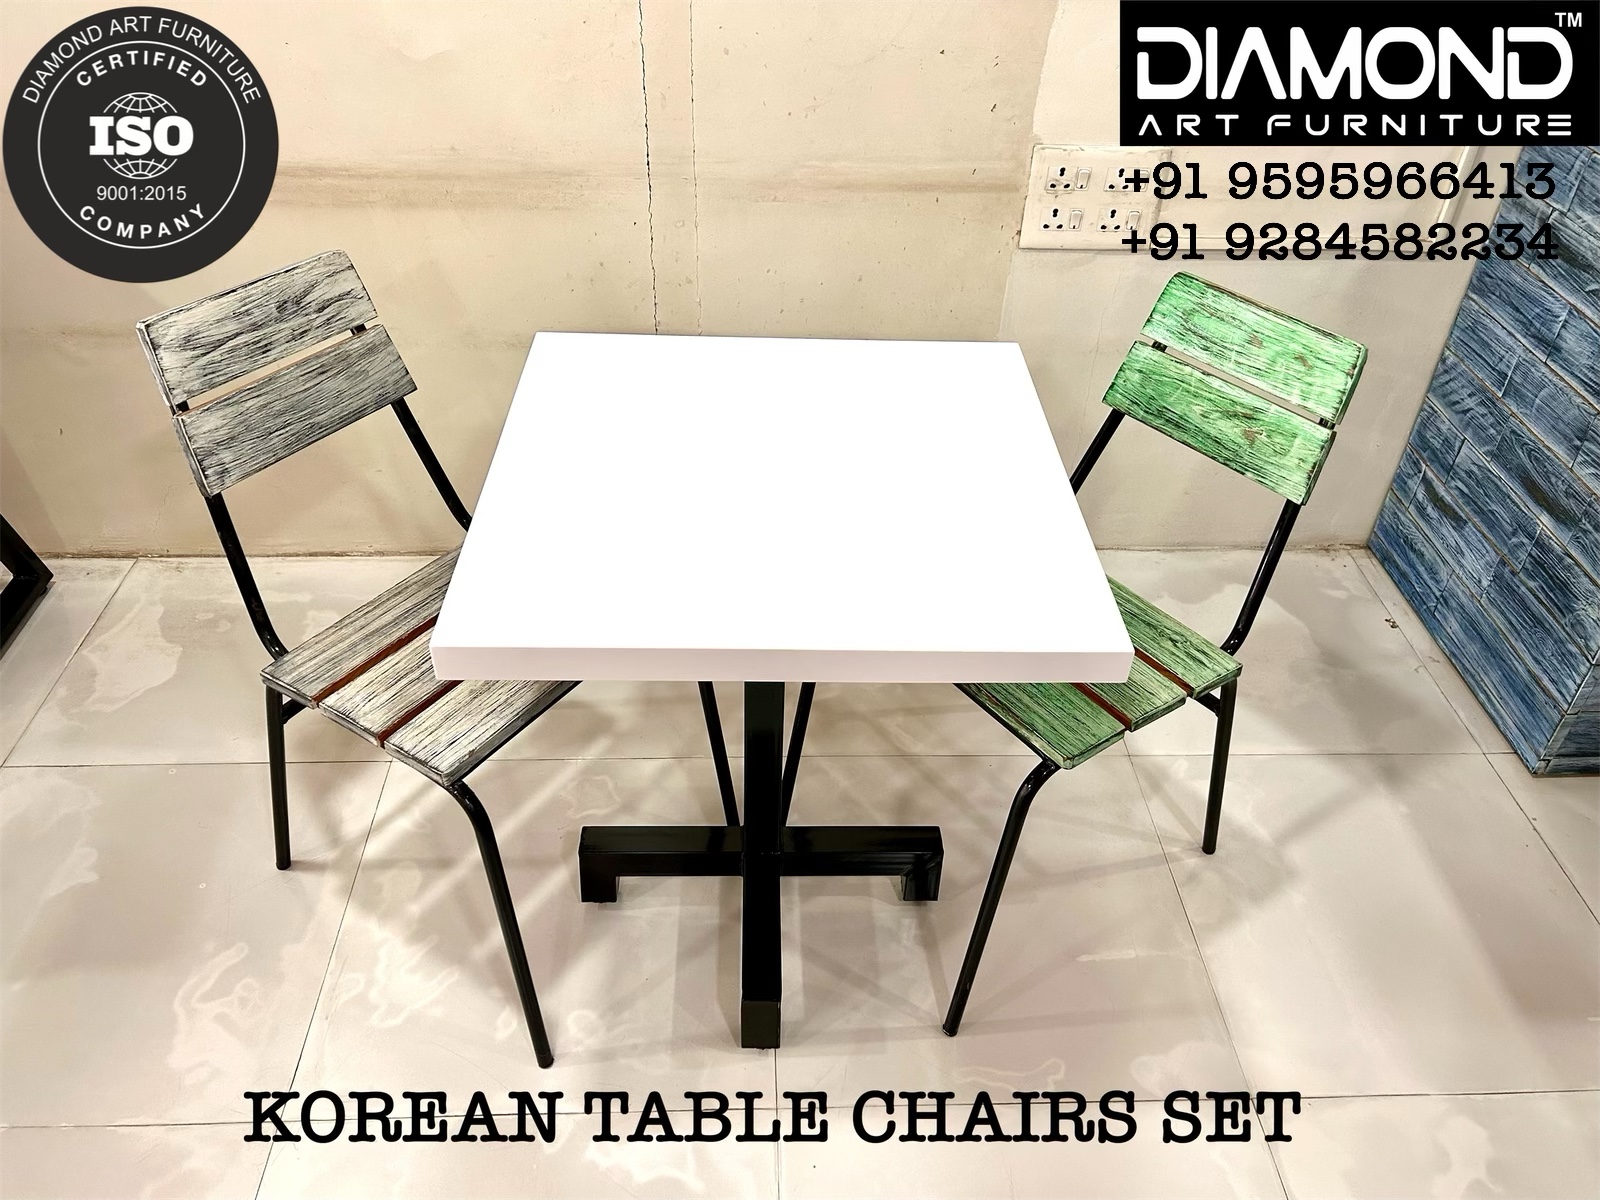 Hotel Service Table at best price in Pune by Diamond Art Furniture